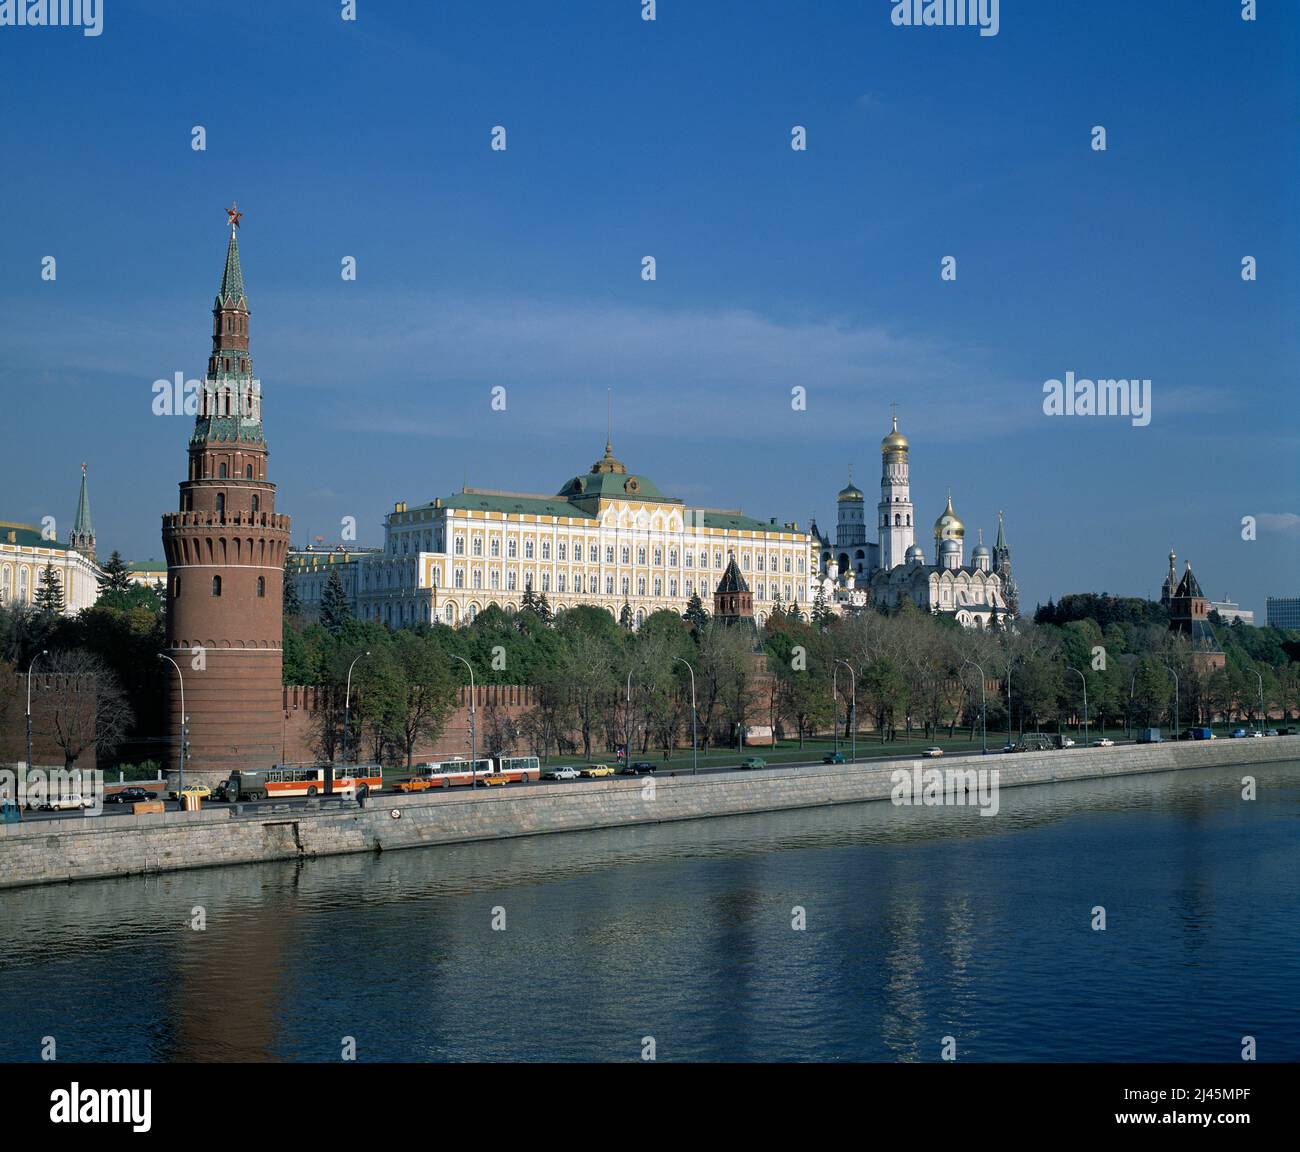 Soviet Union. Russia. Moscow. Kremlin viewed from across Moskva River. Stock Photo